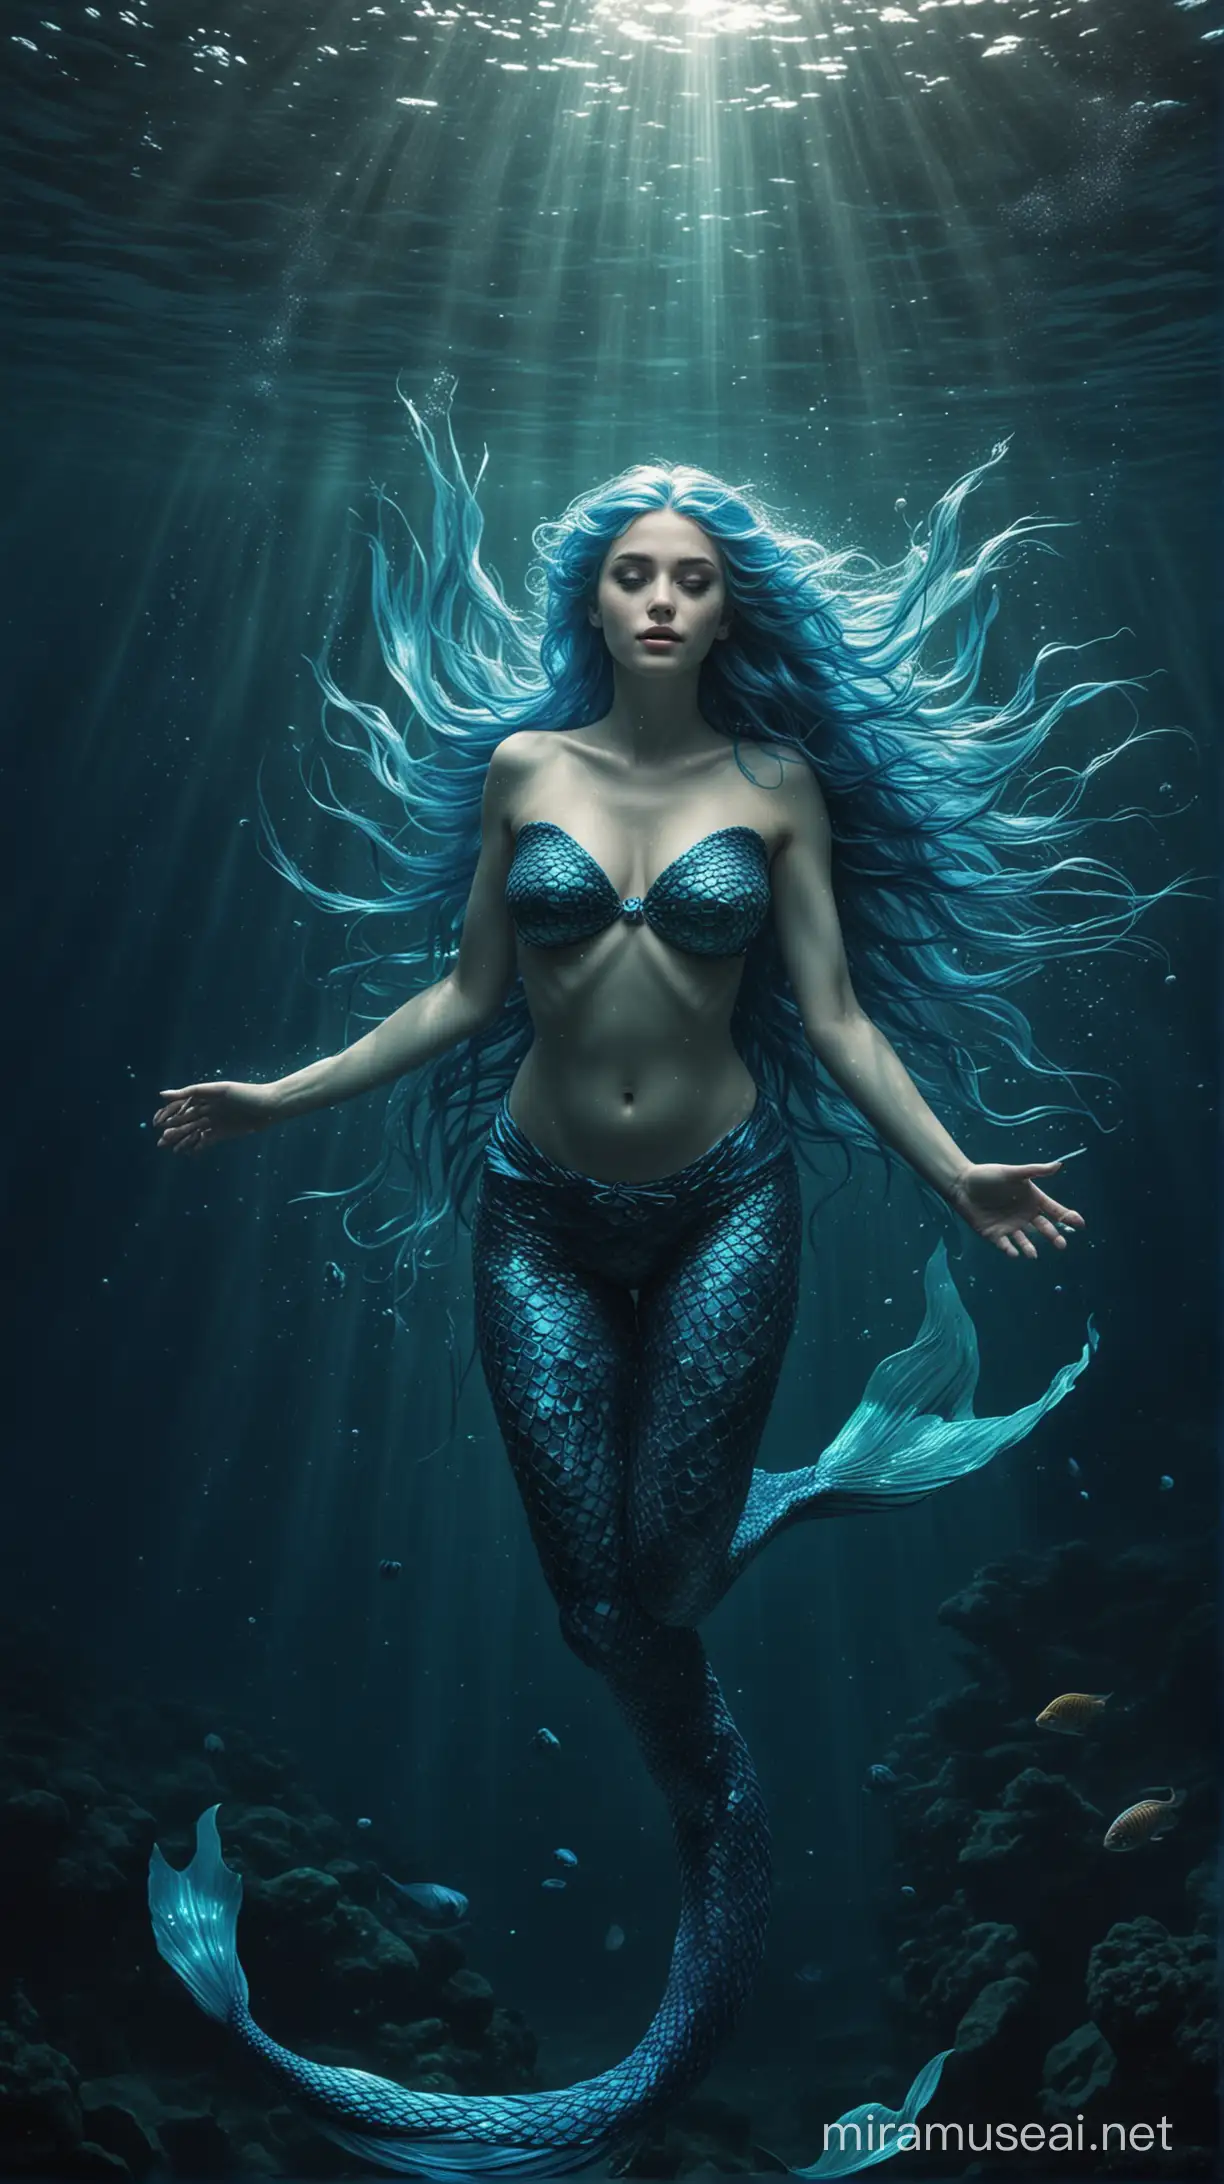 Mystical Mermaid with Blue Hair Swimming in the Depths of the Dark Blue Sea